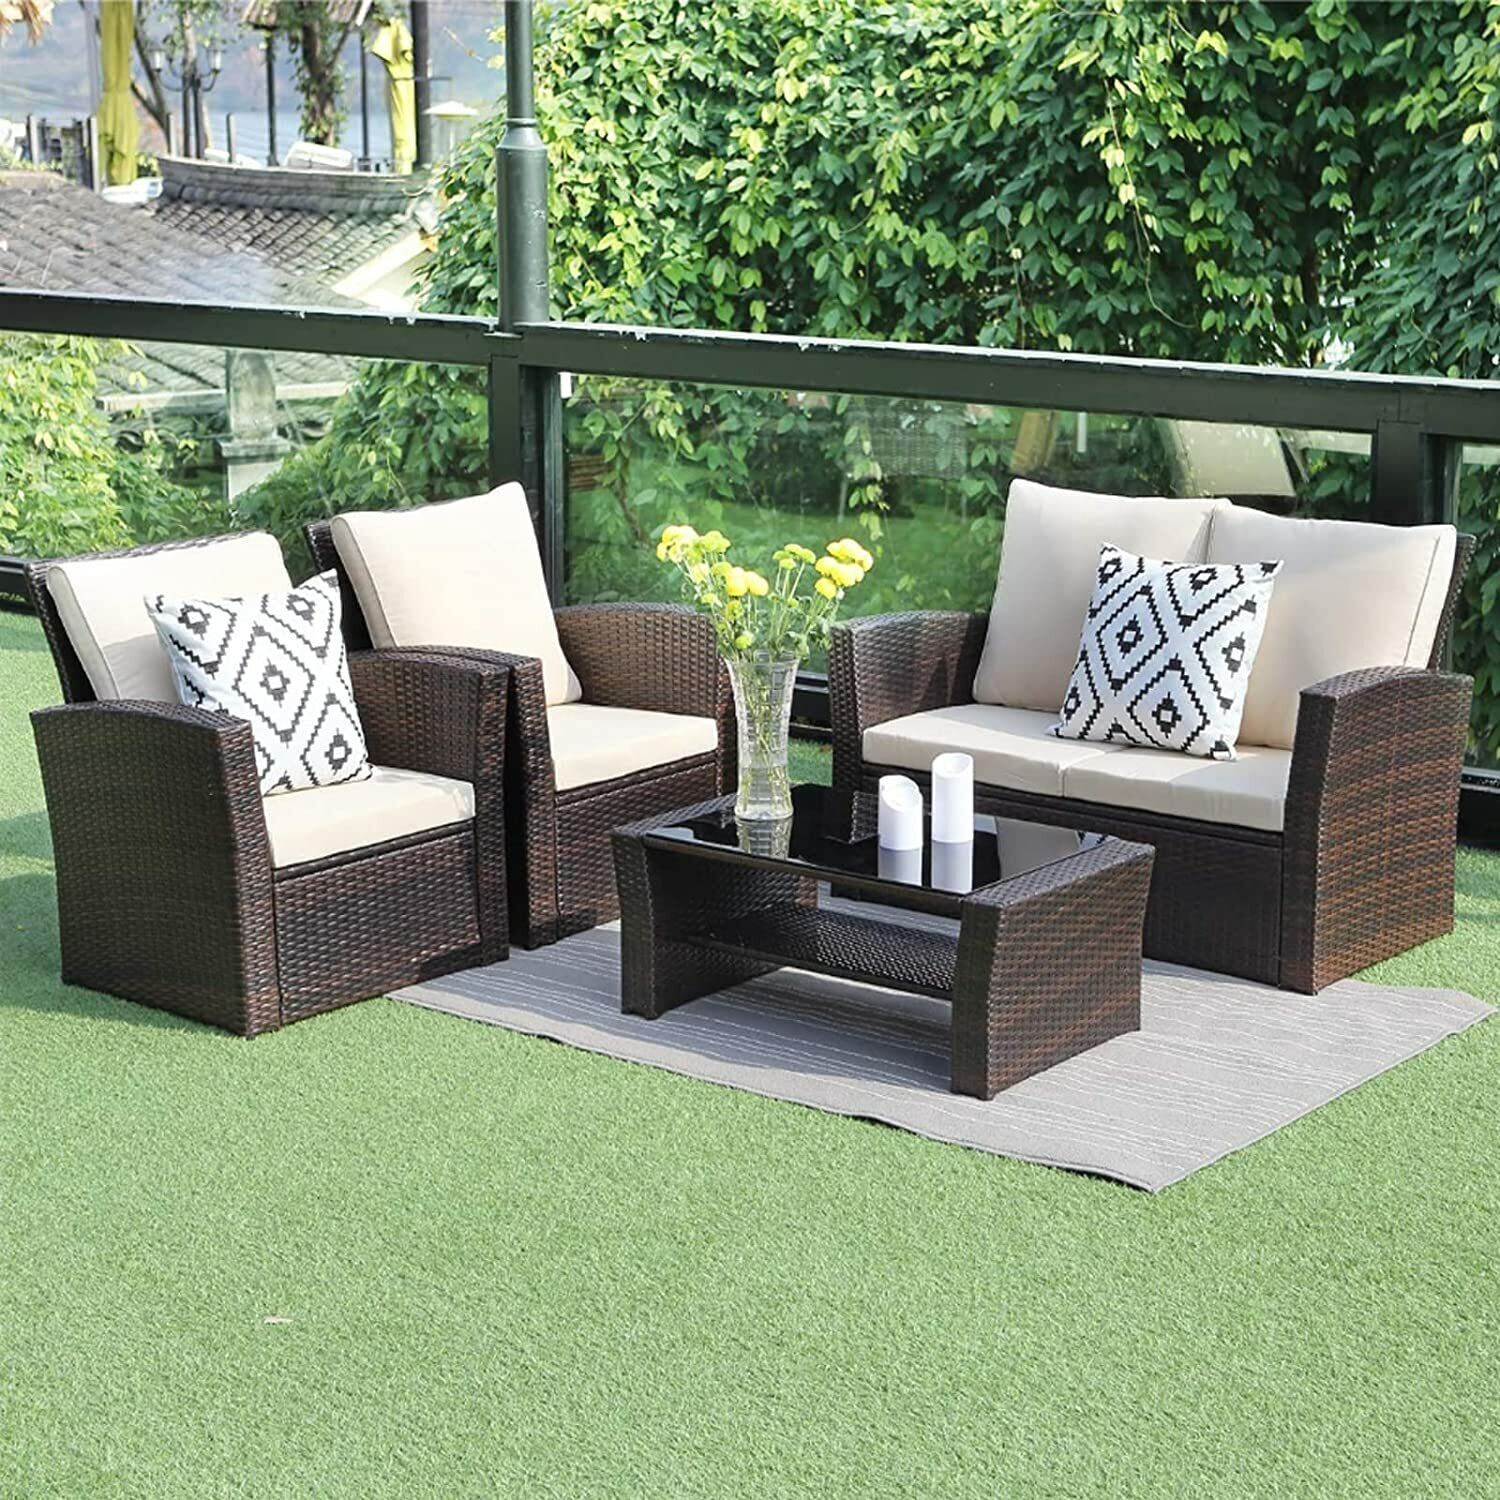 4 Piece Patio Set – Rattan Garden Furniture Table Chairs Grey Black and Brown